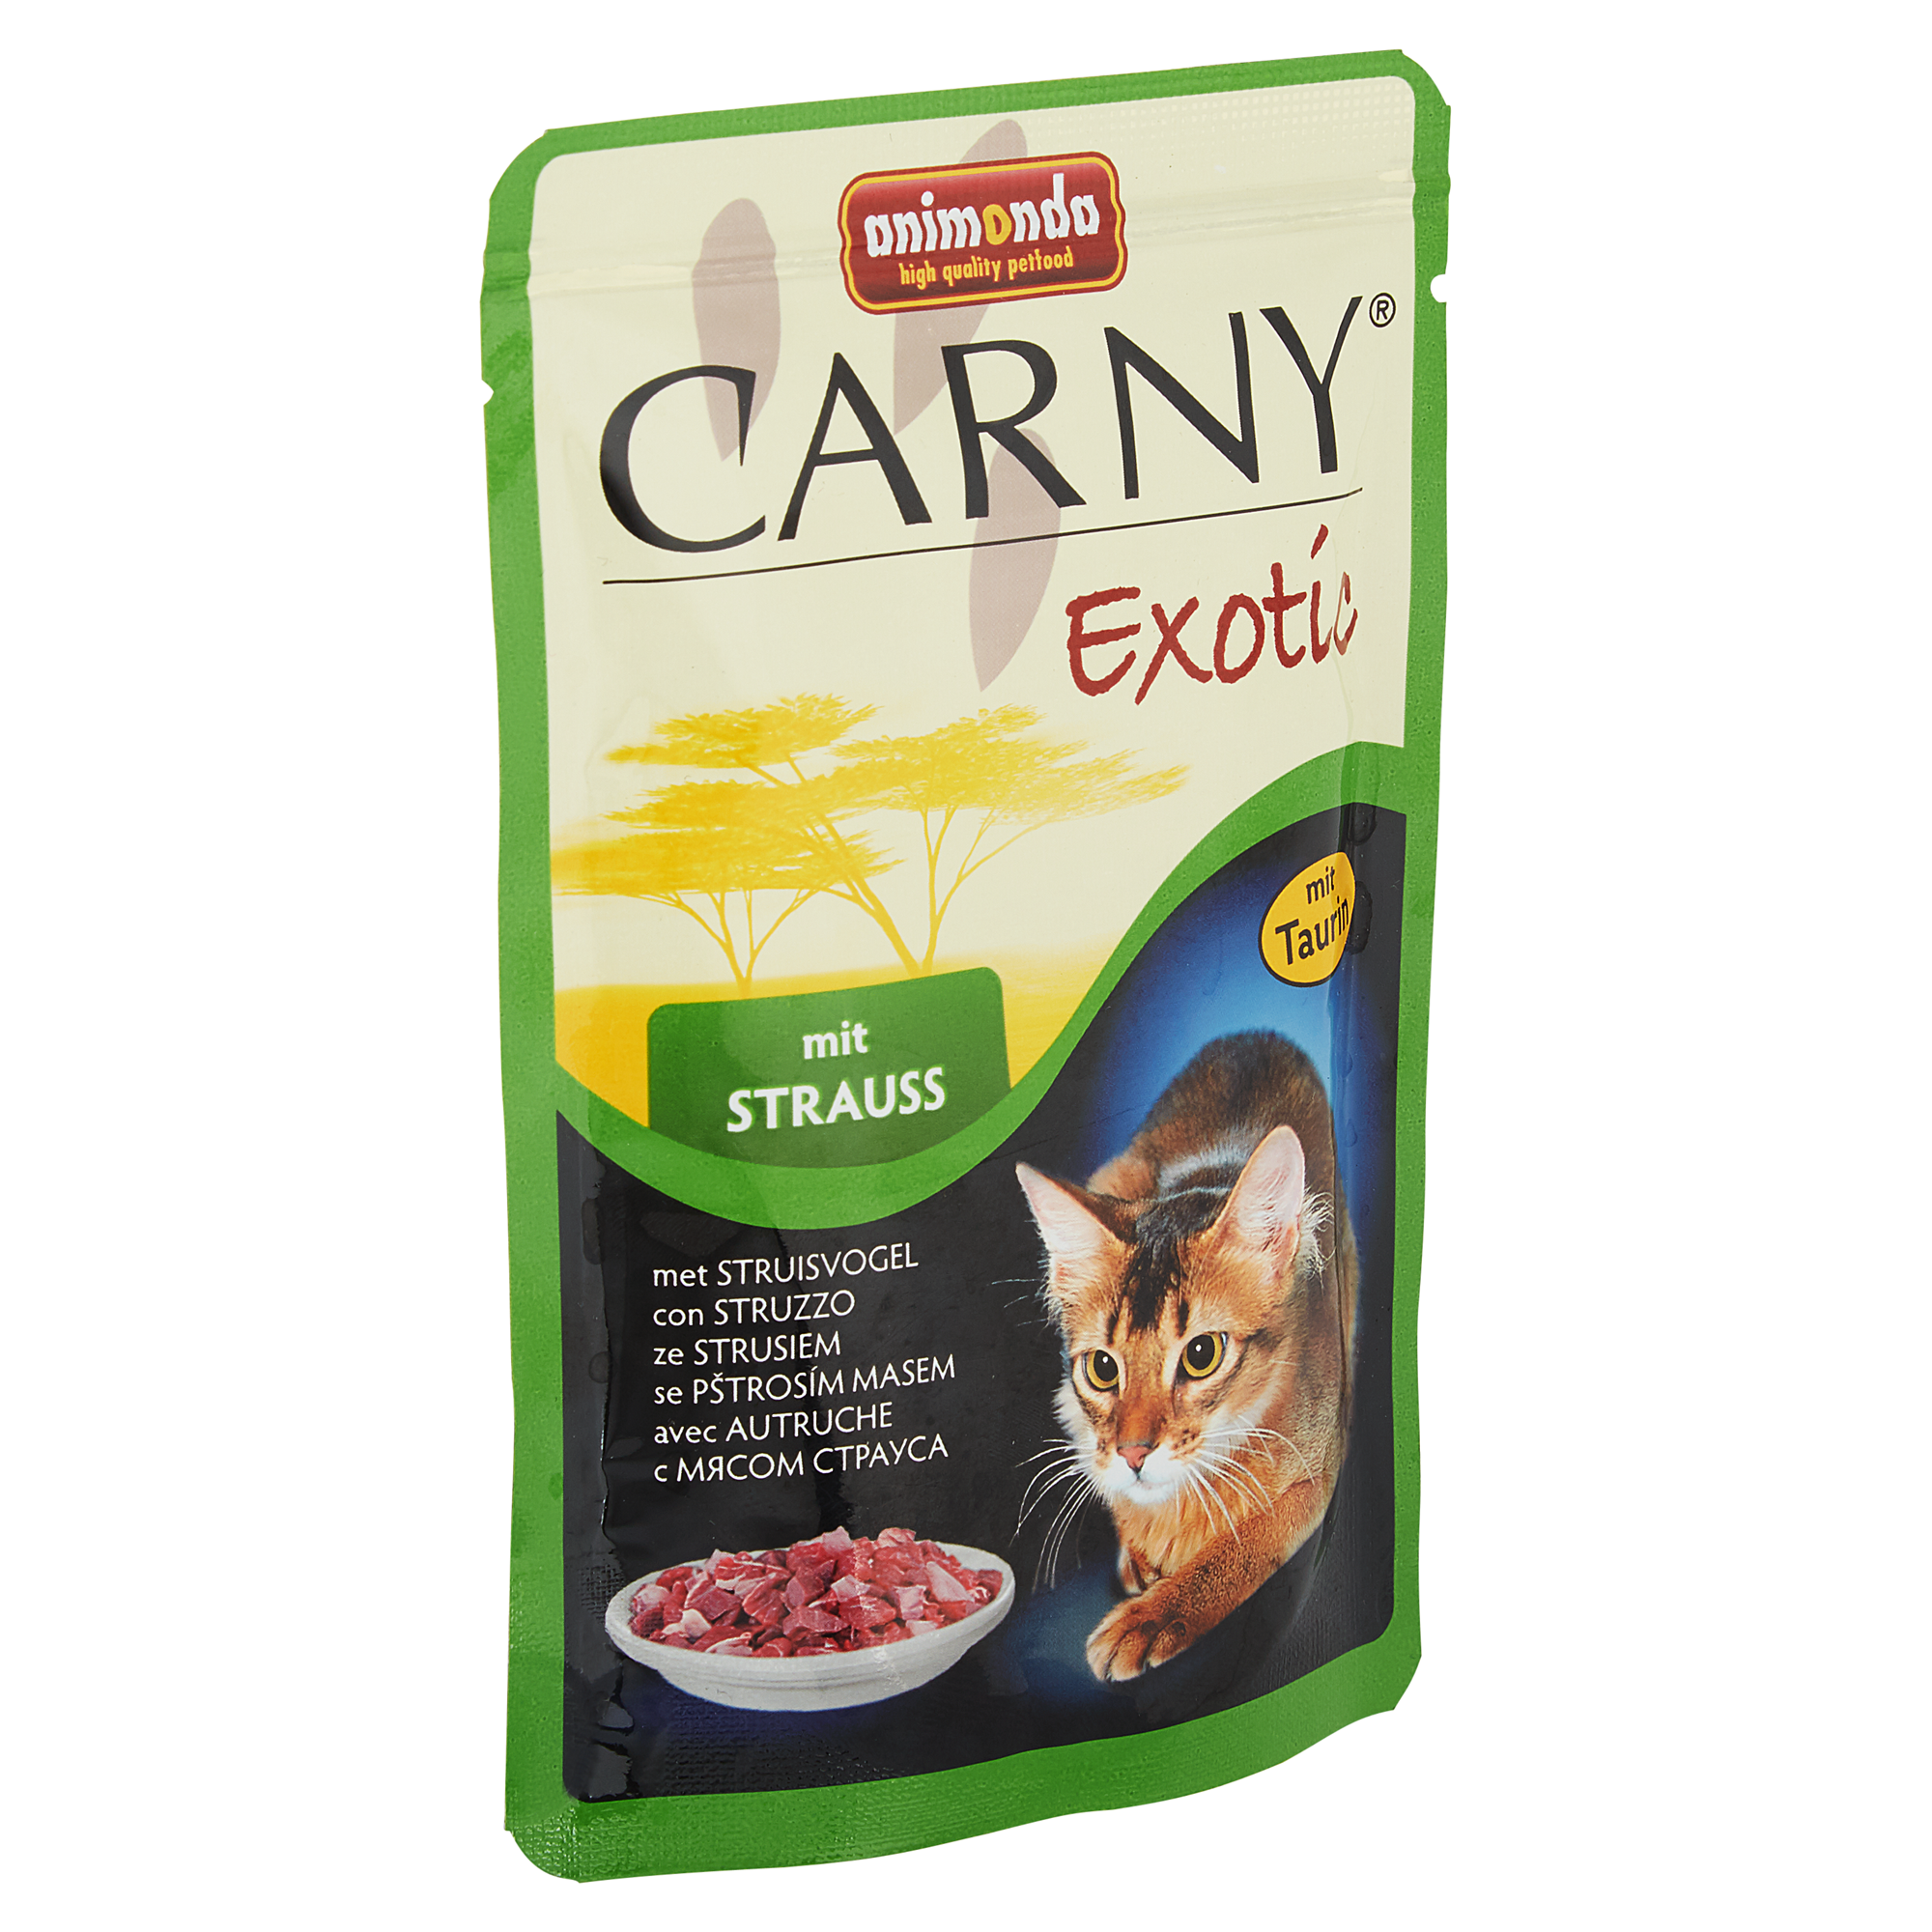 Katzennassfutter "Carny" Exotic mit Strauss 85 g + product picture